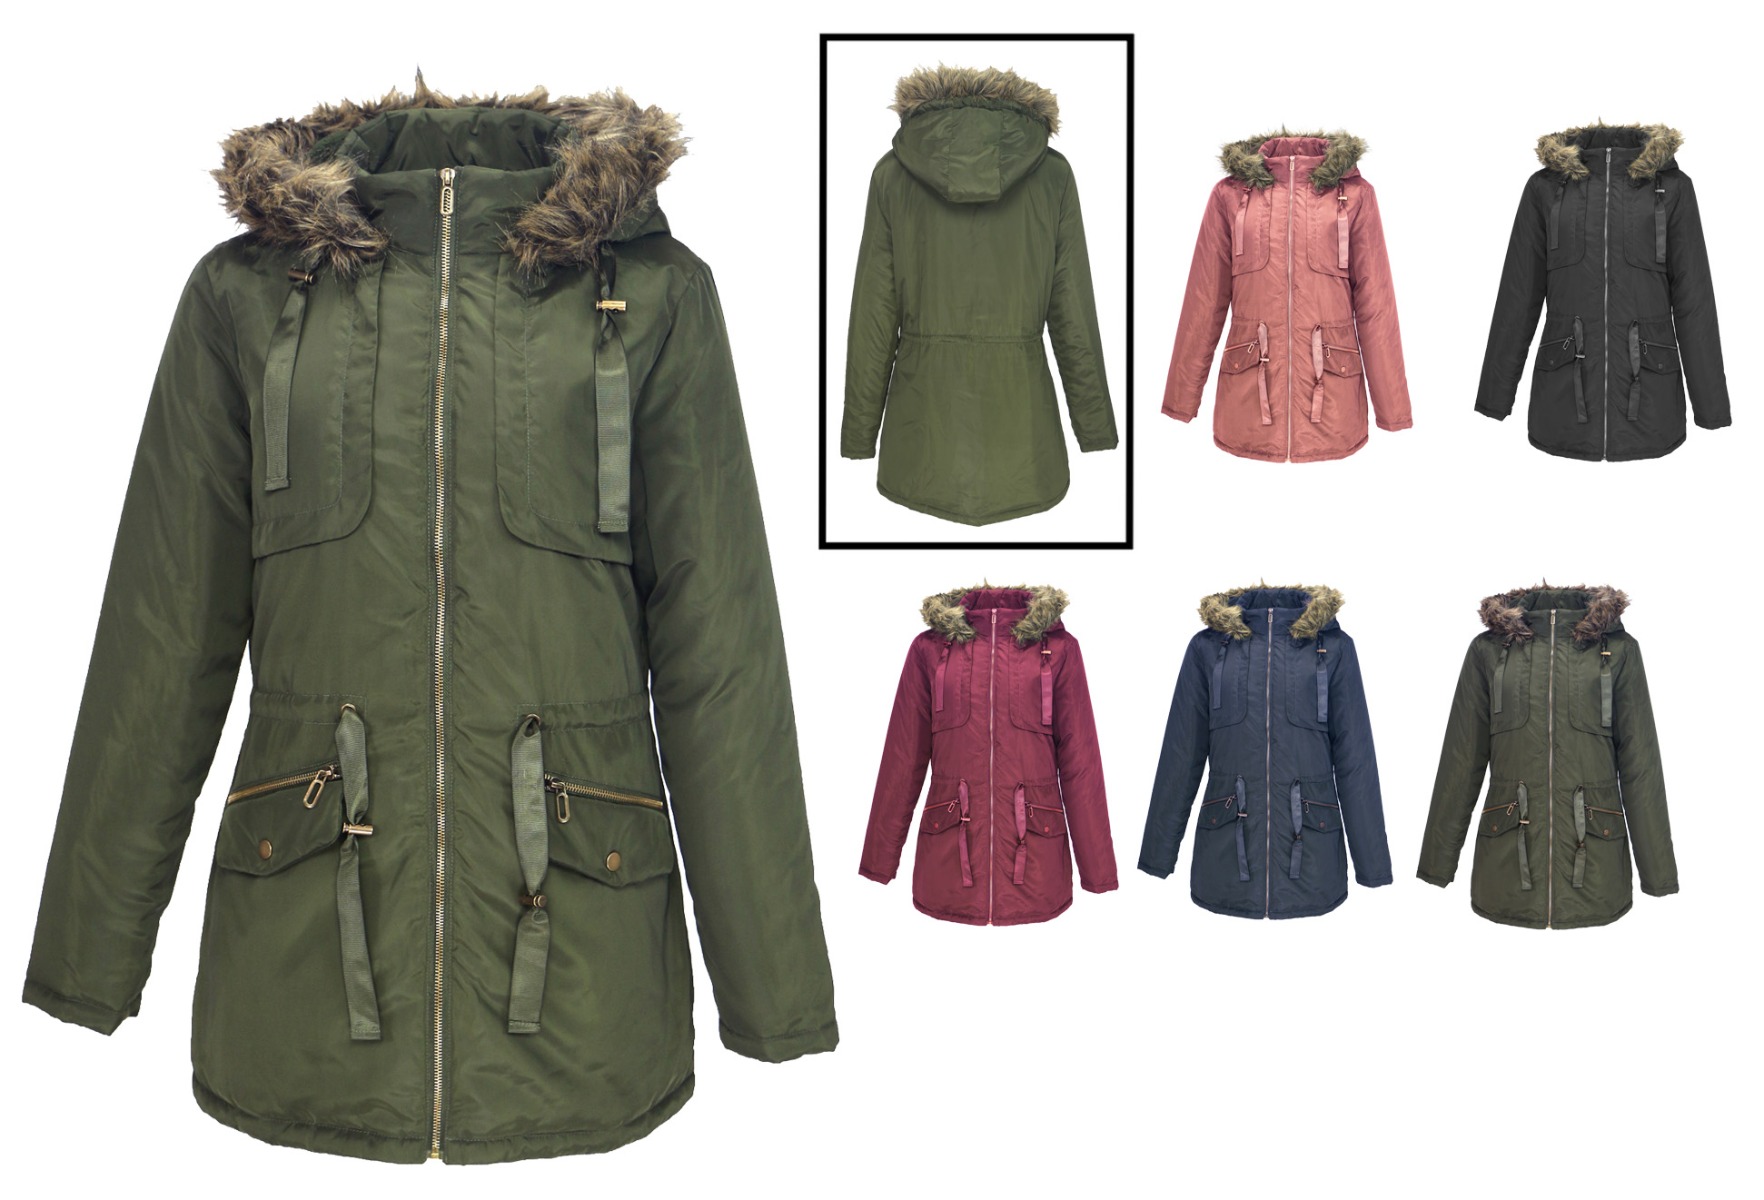 Best Winter Jackets for Sale Online | Winter Jackets for Men and Women ...